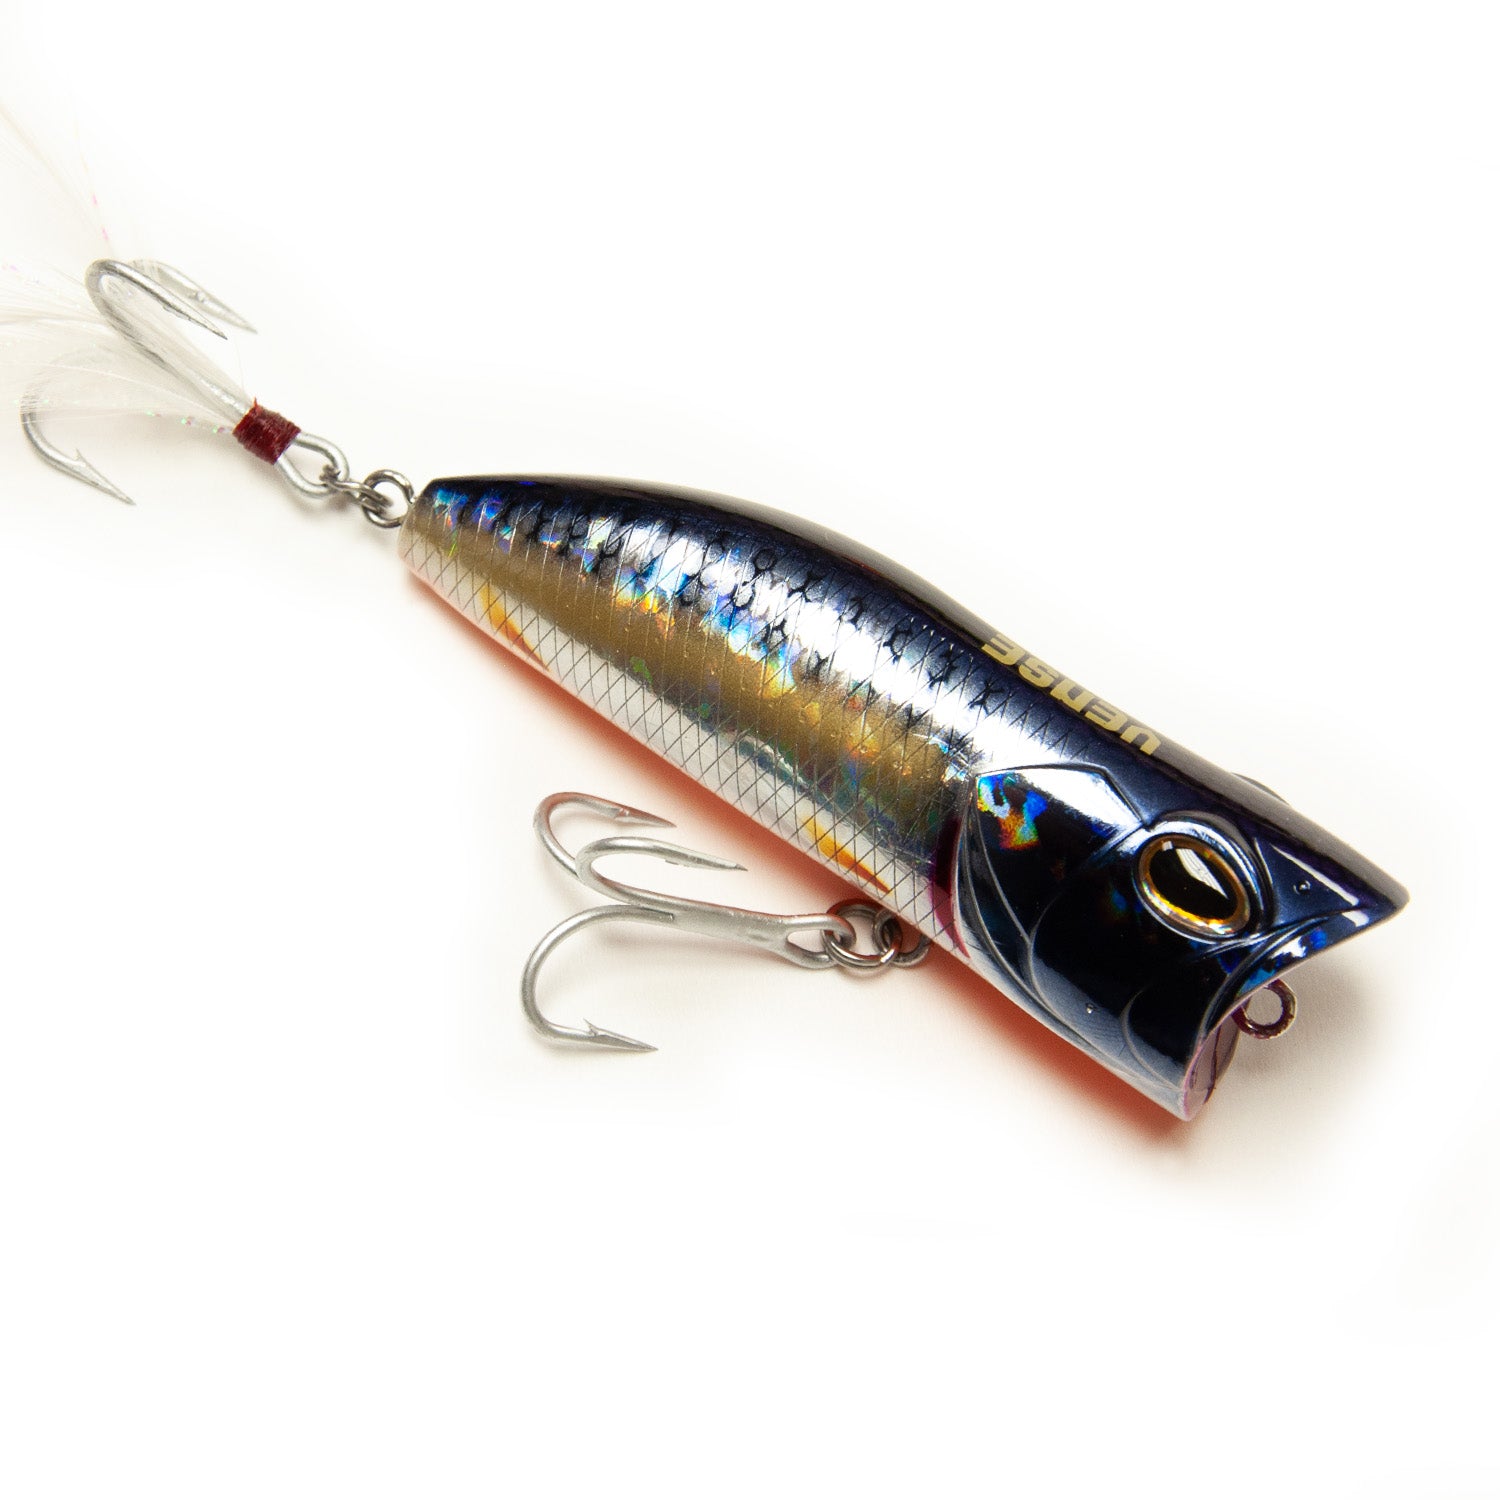 https://cdn.shopify.com/s/files/1/1780/9773/products/Vense_new_lures_2019_0010_Layer_26.jpg?v=1563389154